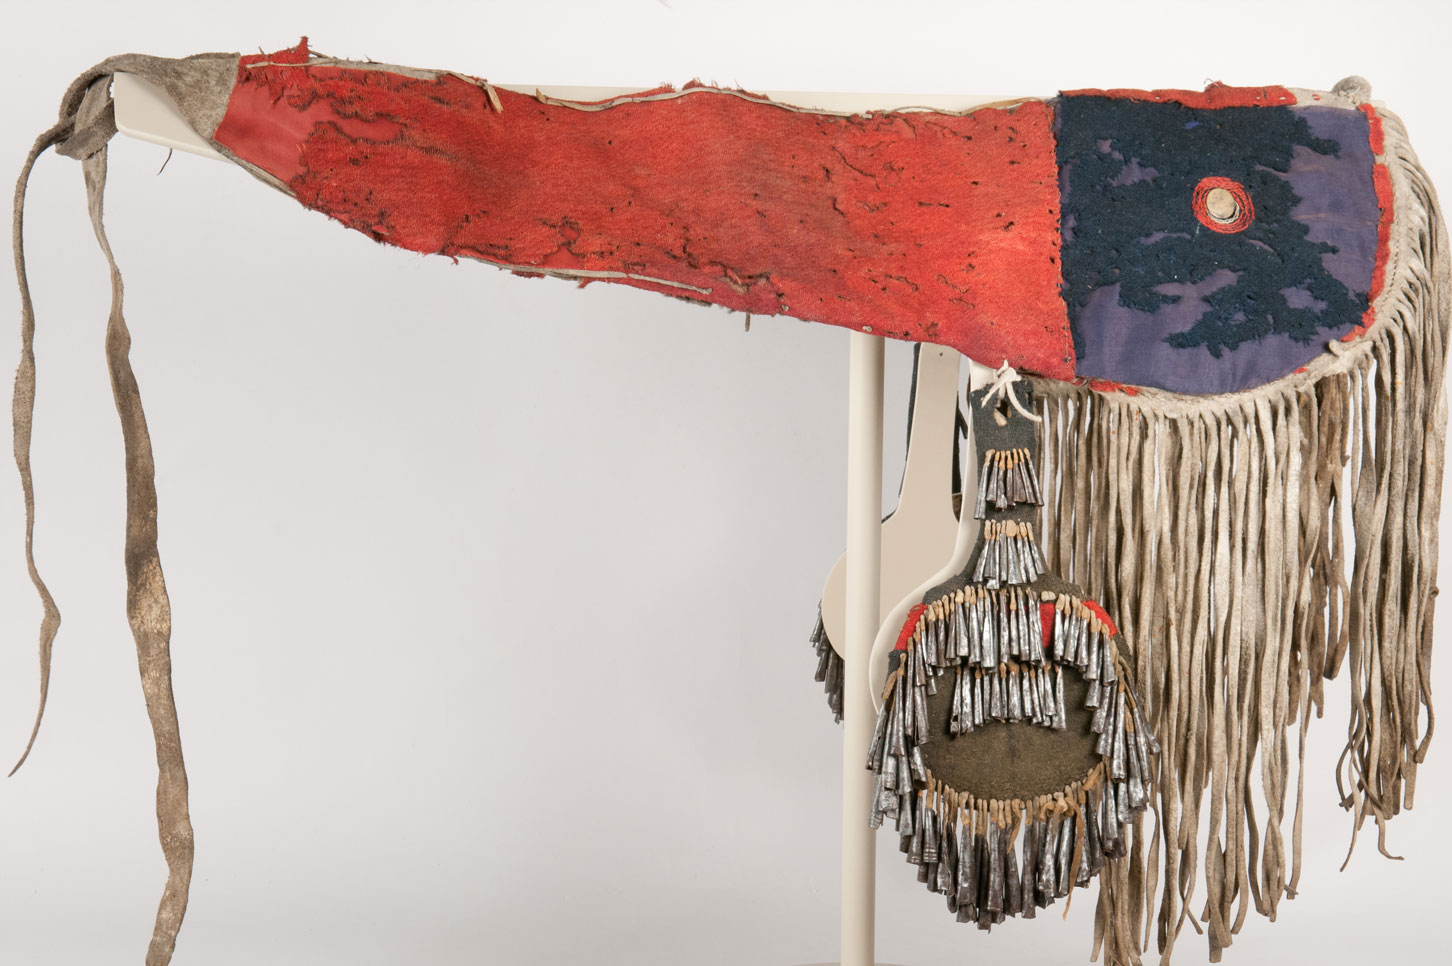 A cloth and bison hide horse crupper decorated with 'canteen' side pendents, jingles, and fringe. Each panel is made from scarlet and navy blue colored tradecloth. The tin cones, or 'jingles,' are made of pieces of tin, bent and rolled into shape. 